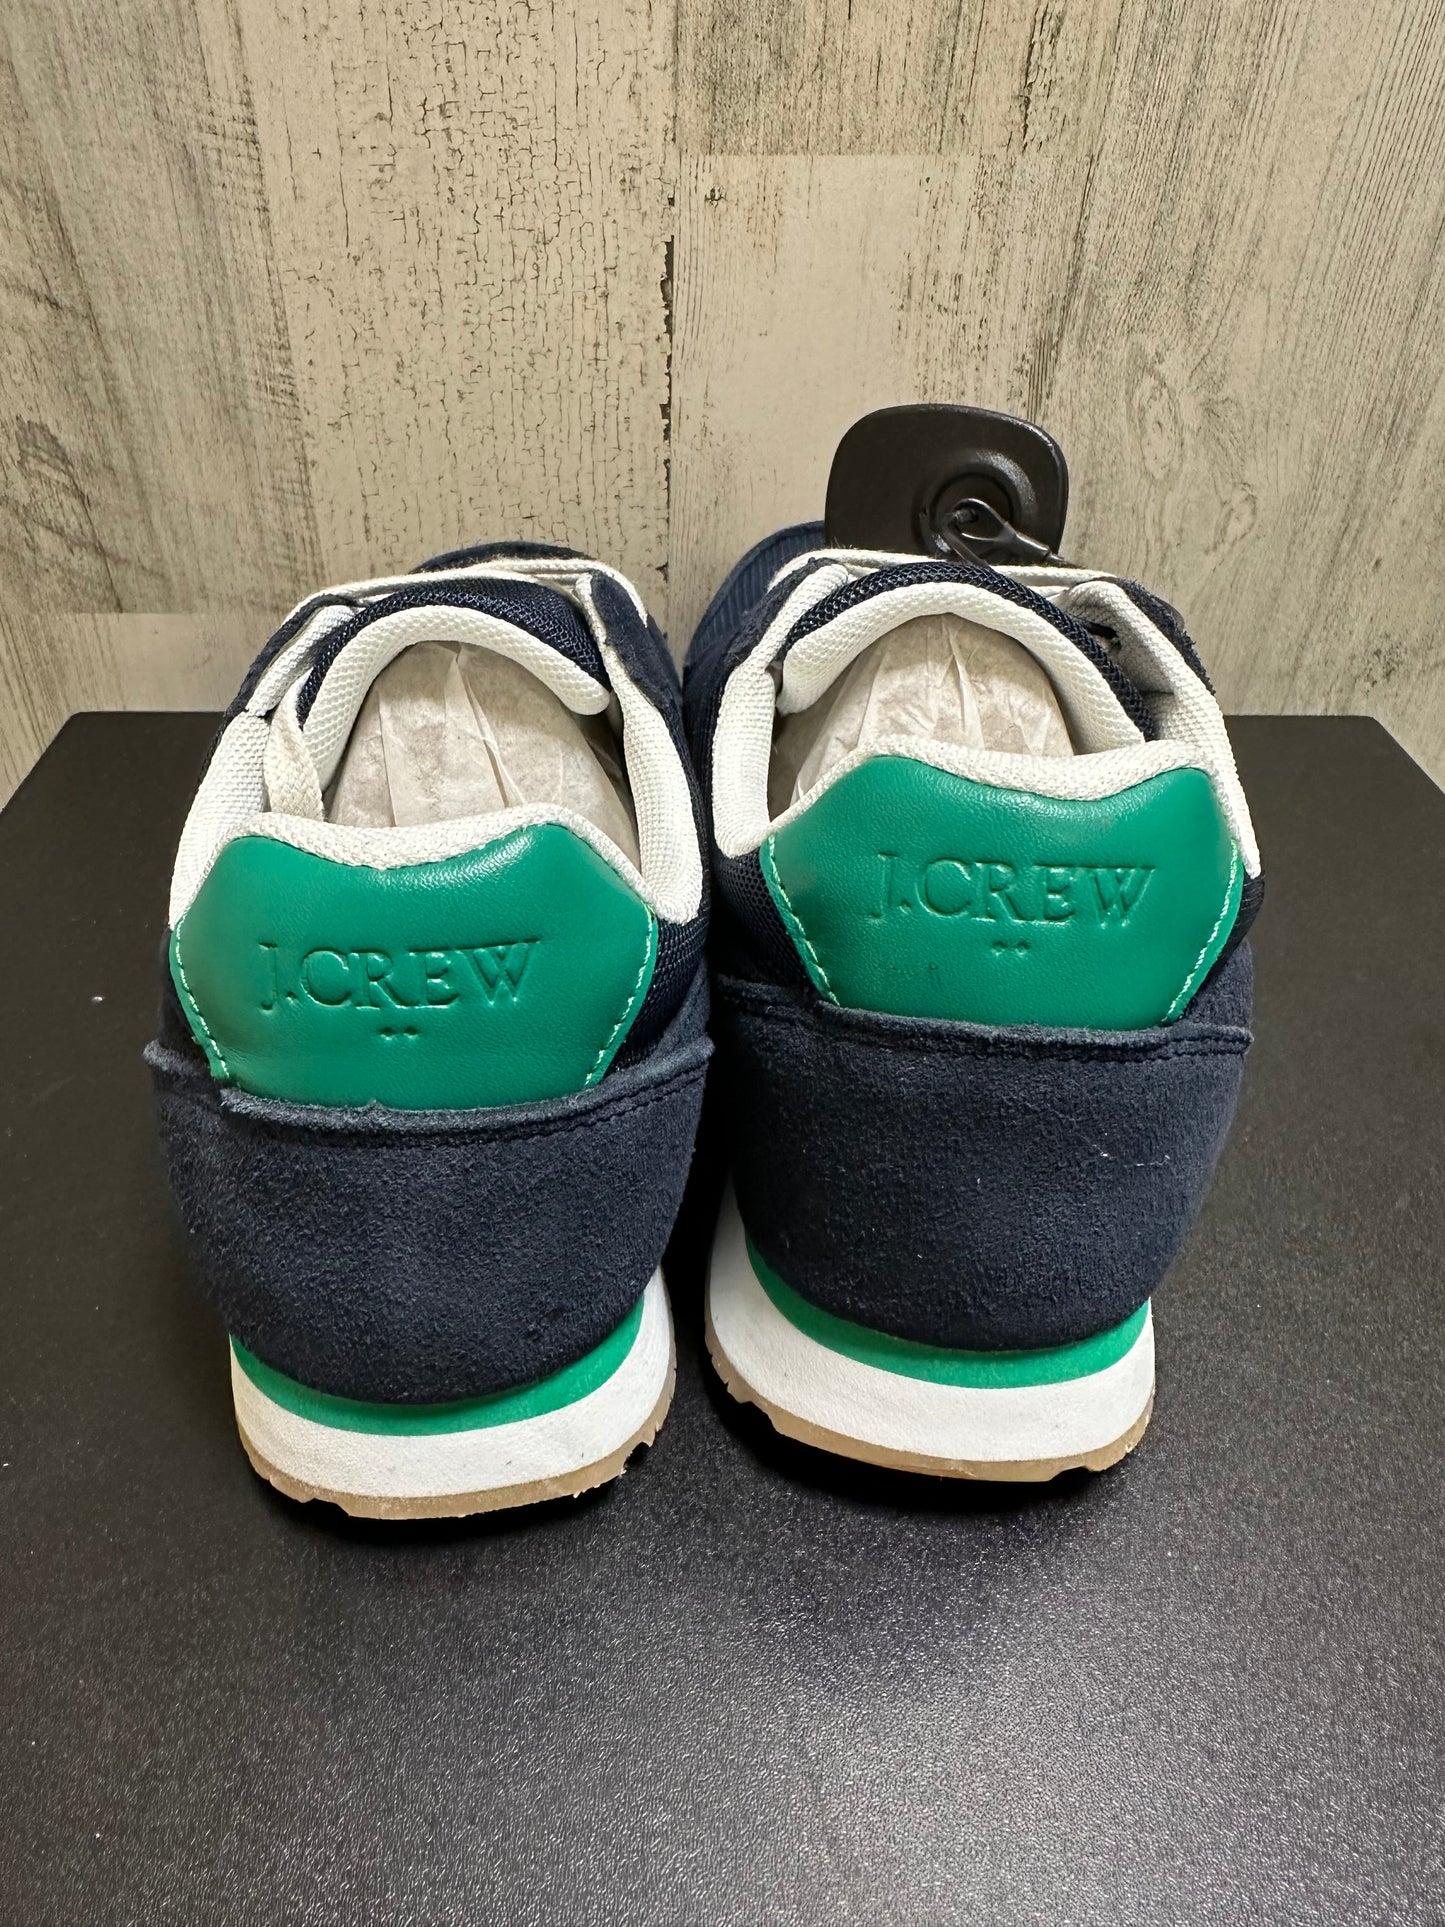 Shoes Sneakers By J. Crew  Size: 6.5